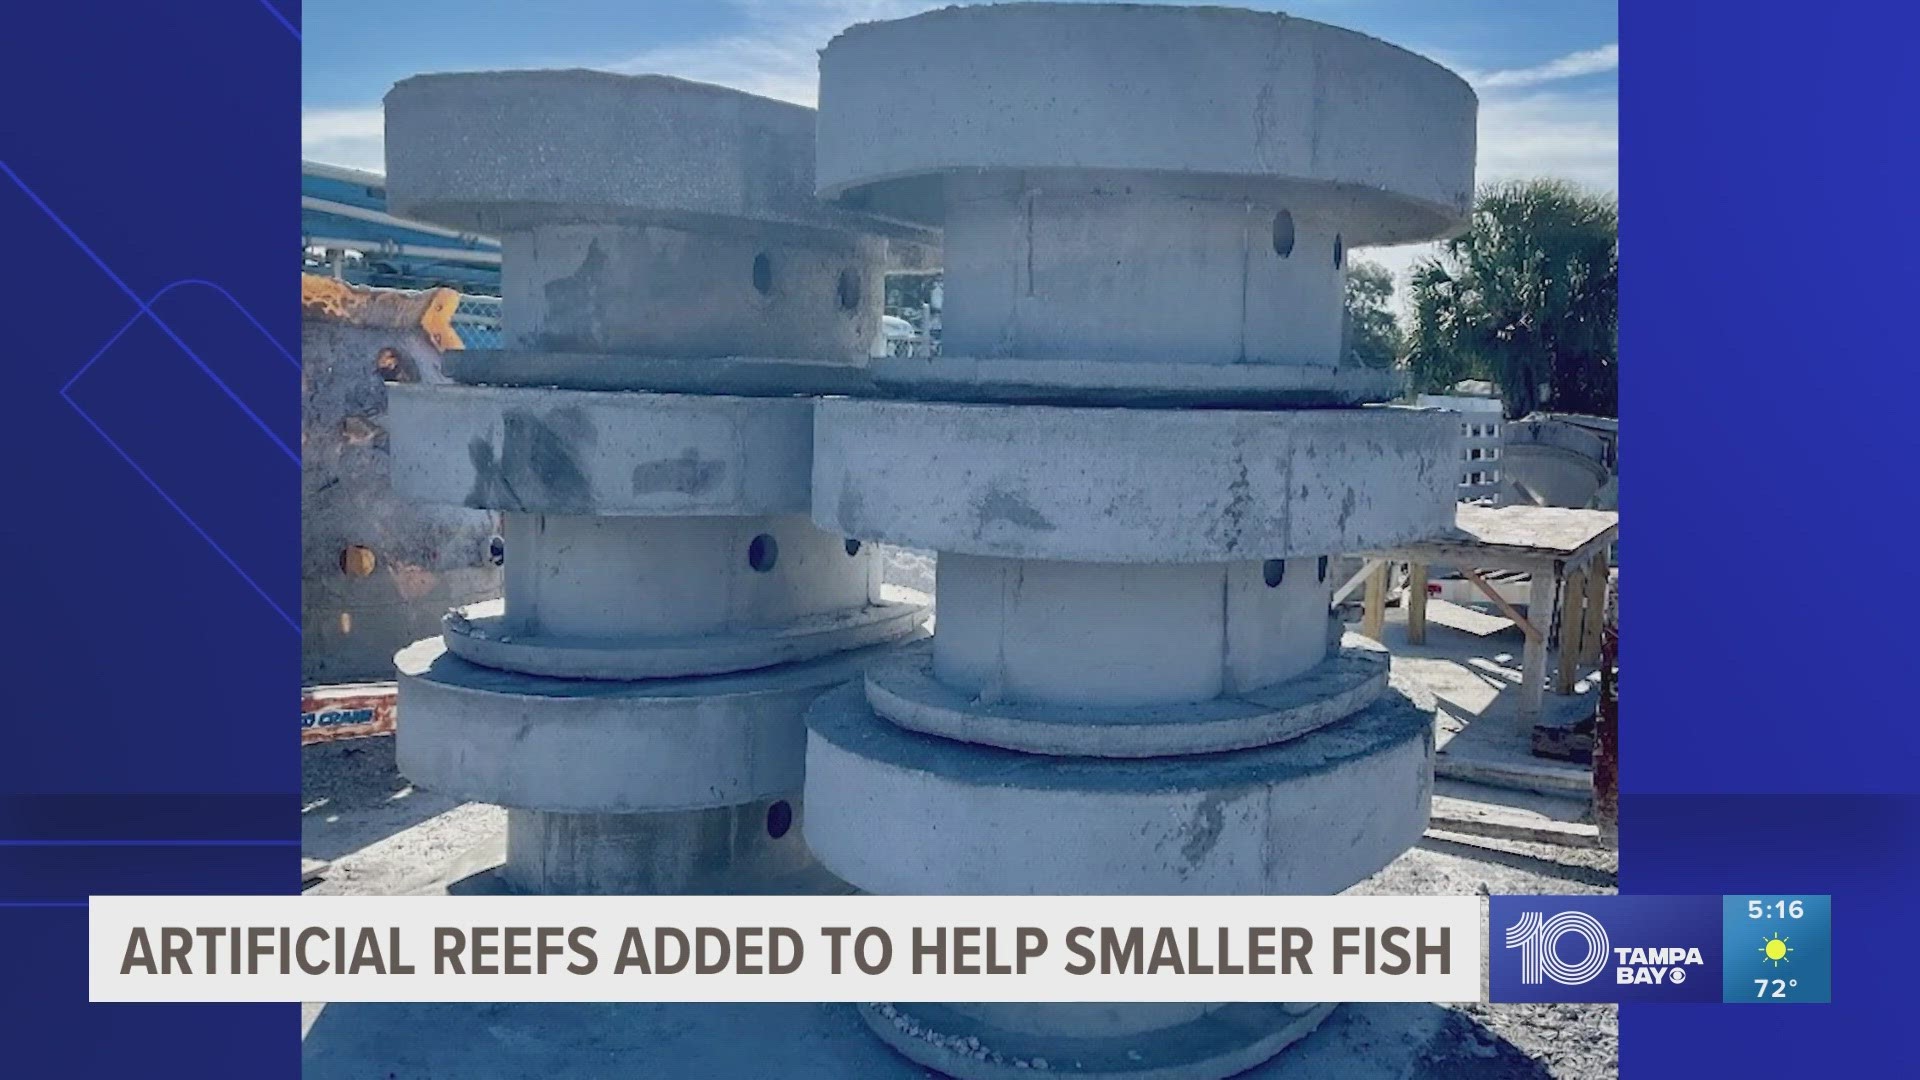 The reefs mimic natural ledges and can also protect fish from predators.